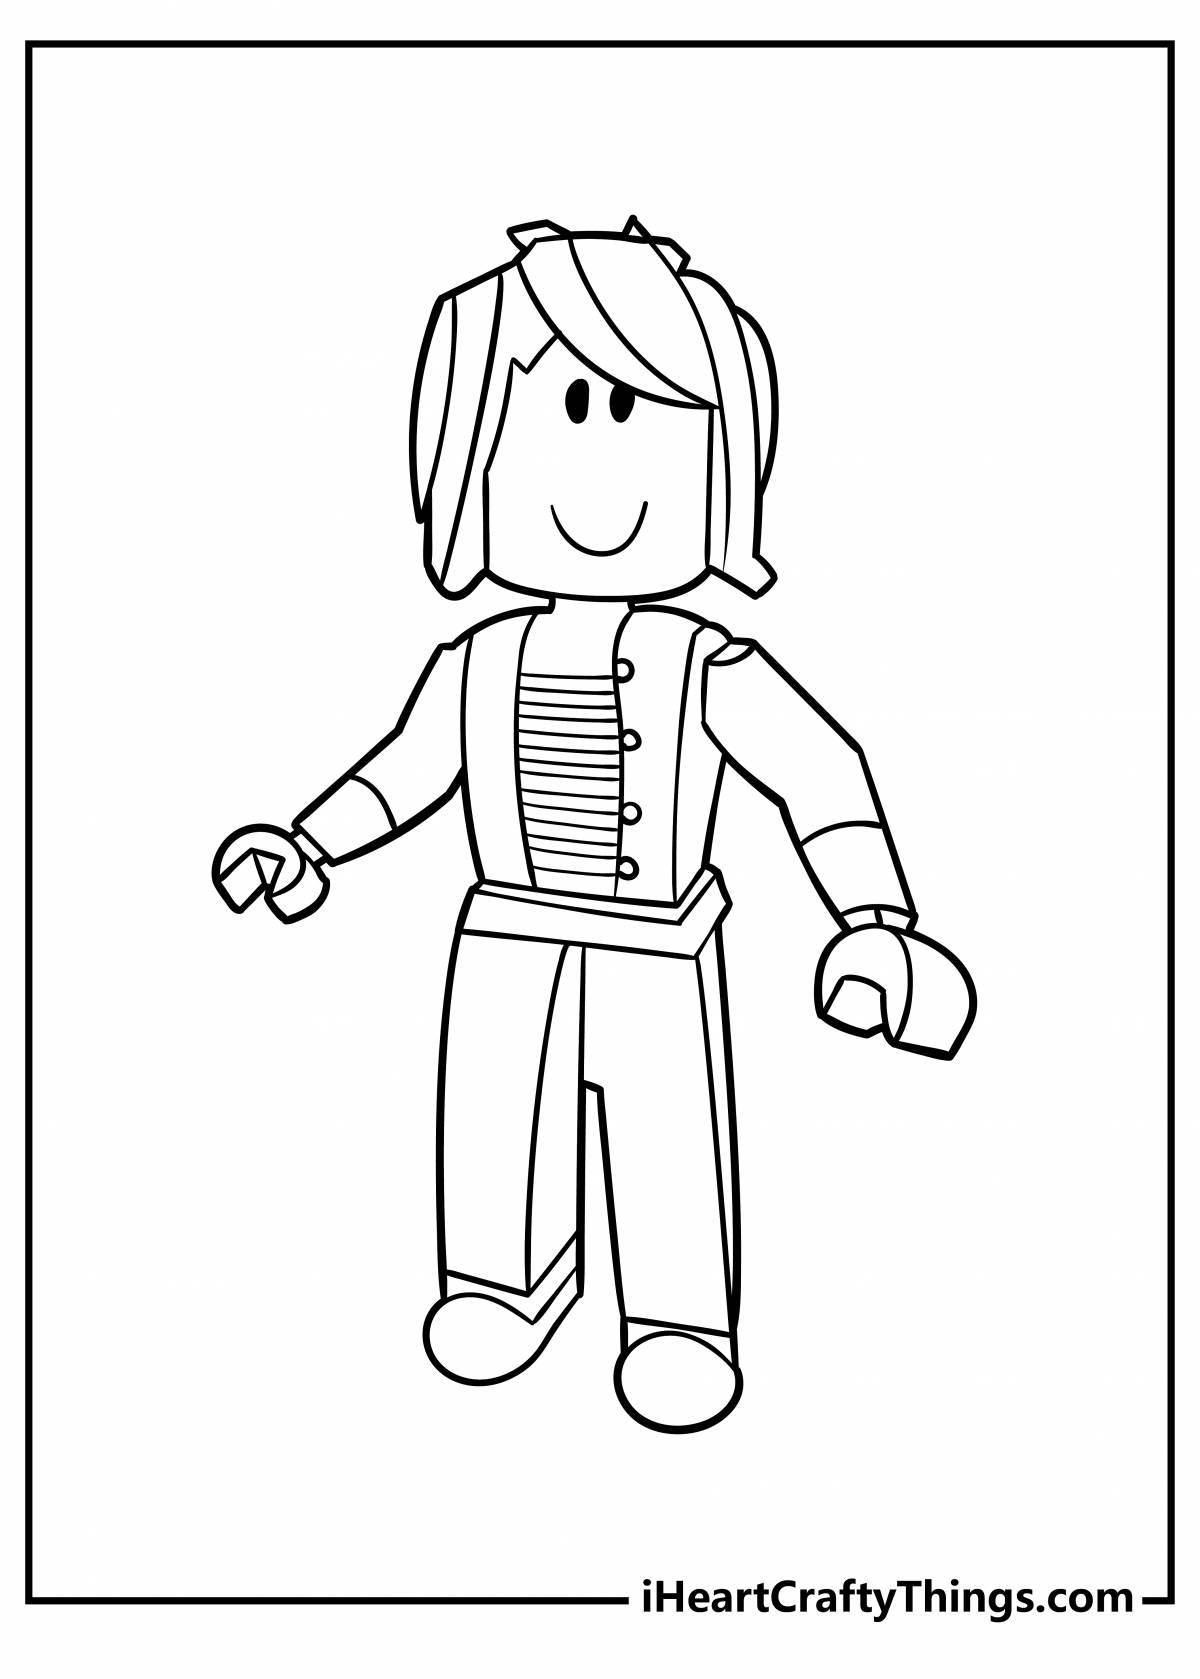 Amazing roblox icon coloring page